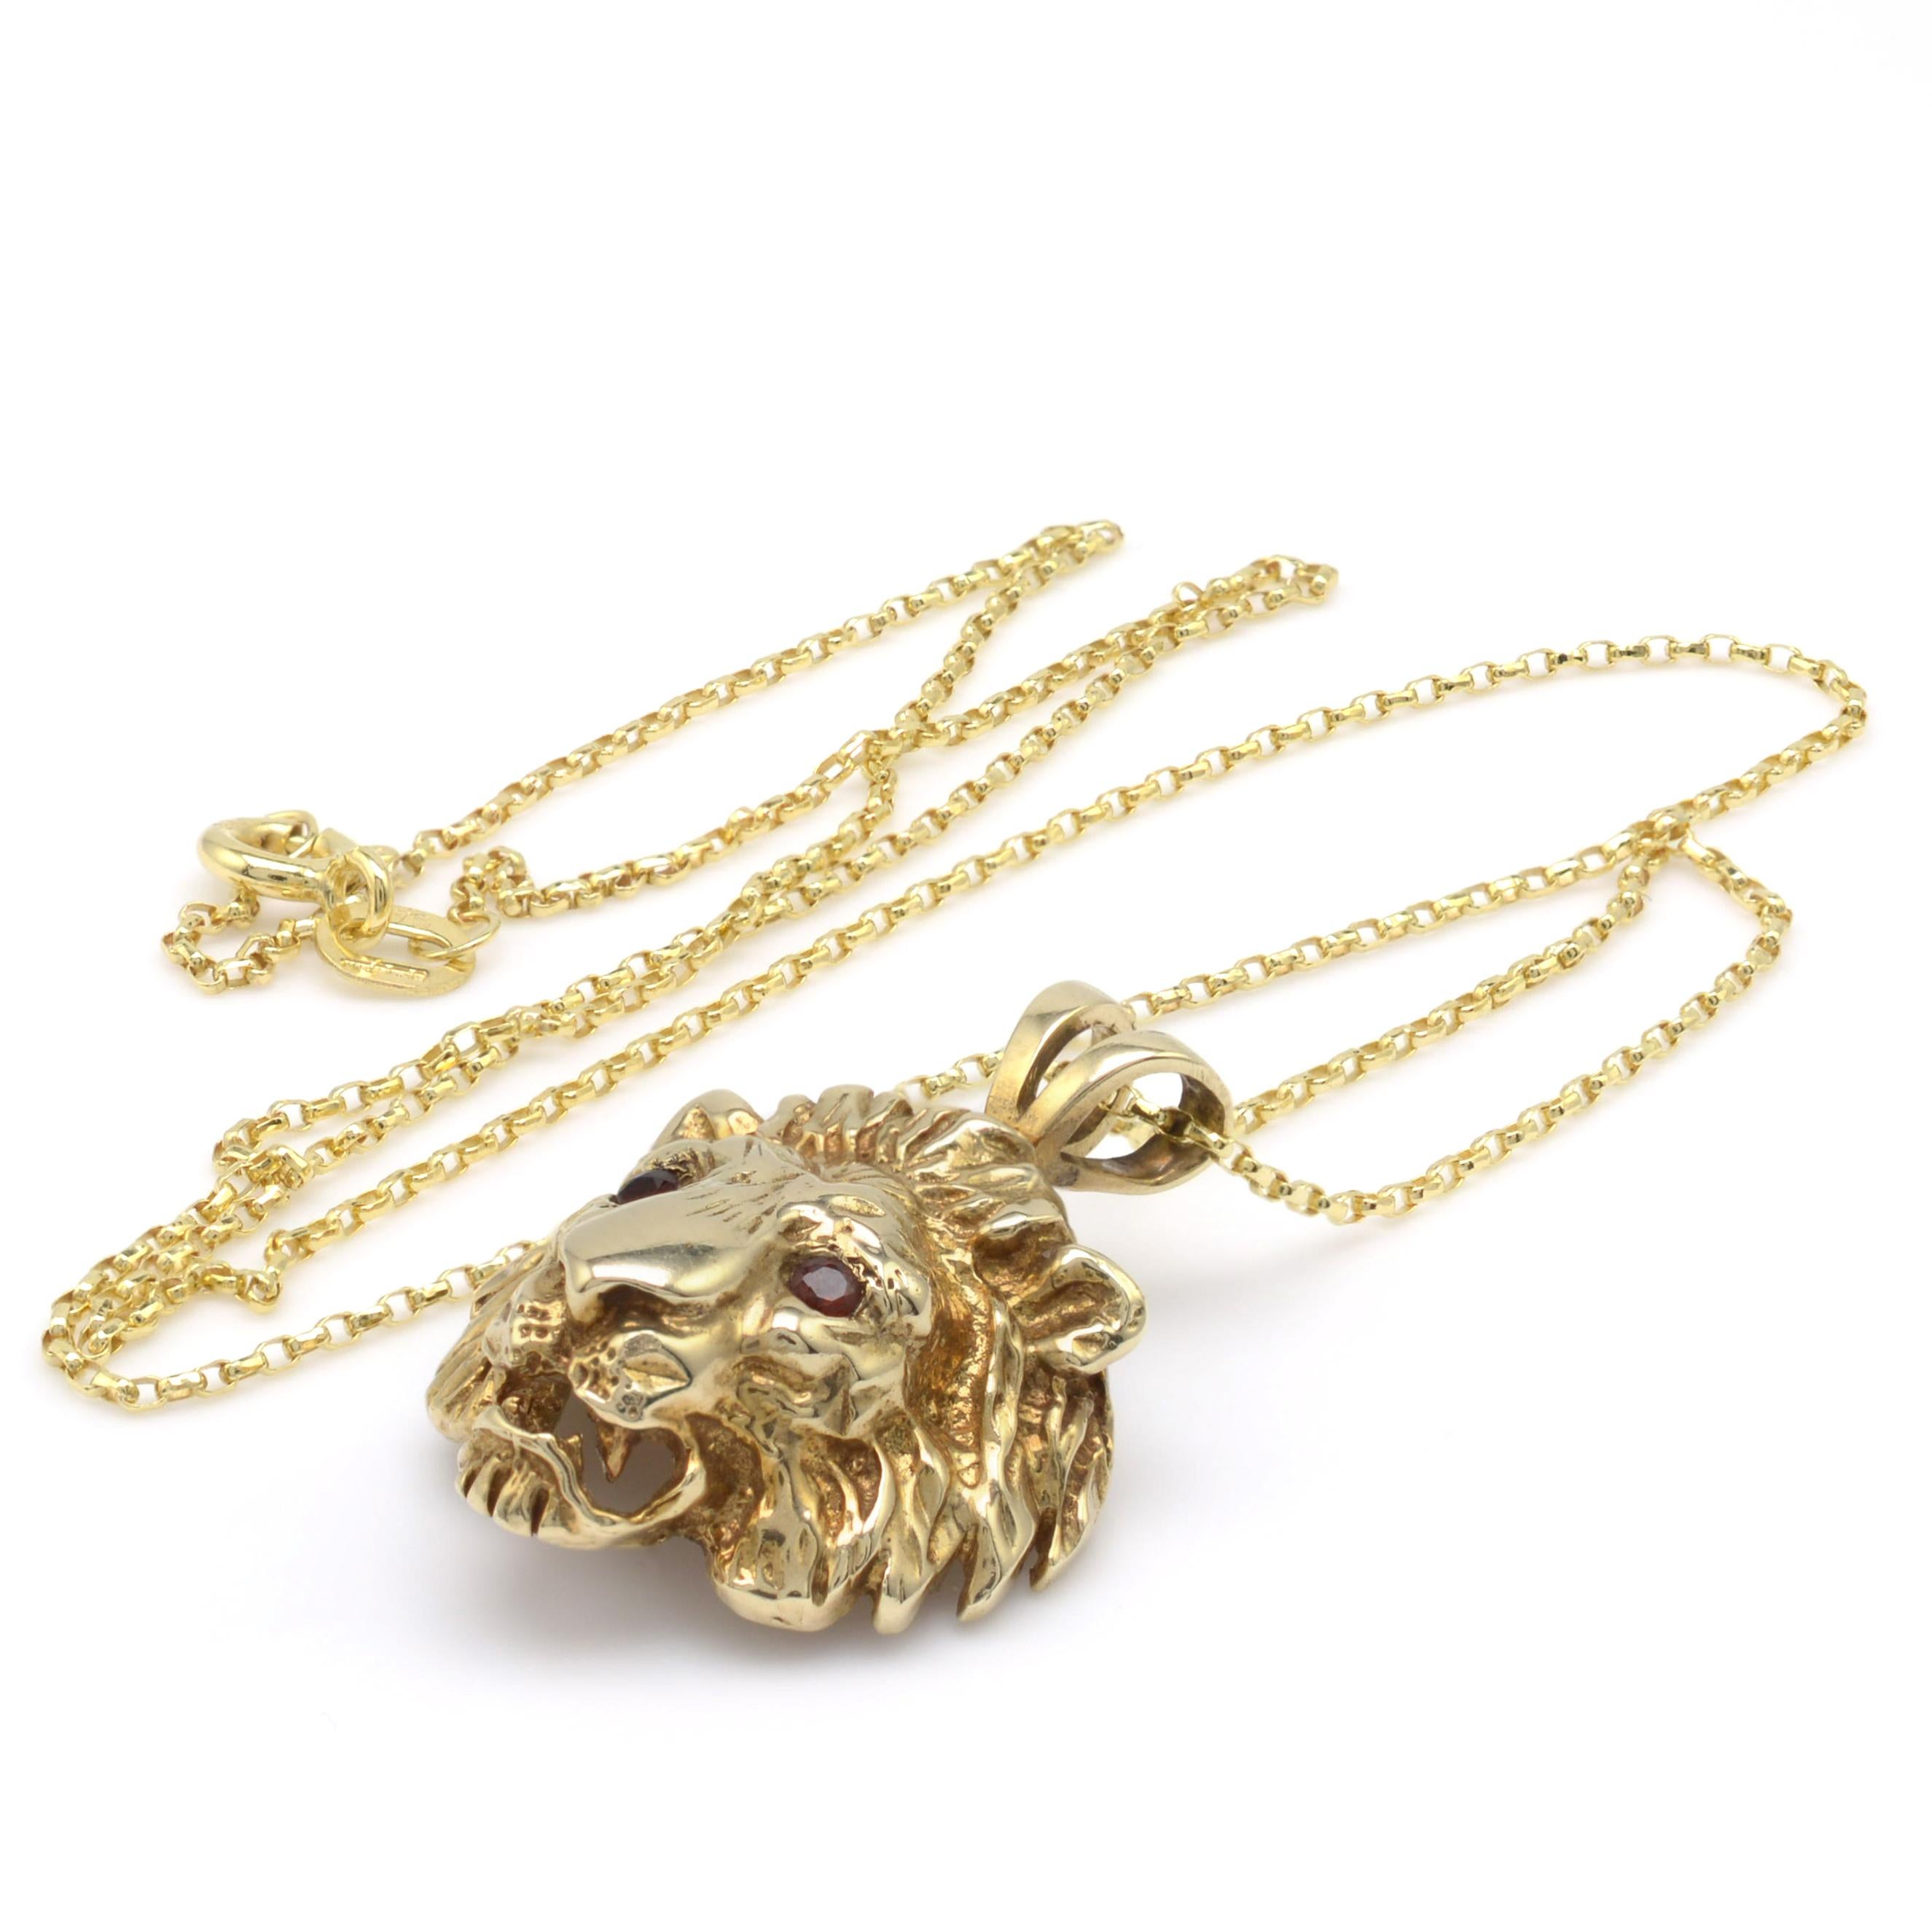 A superb solid yellow gold Lion pendant necklace with gemstone set eyes and complete with complimentary 18-inch lightweight gold belcher chain. Circa 1970s

- Lion weight: 5.3 grams
- Chain weight: 1.1 grams
- Hallmarks: Full assay marks to the